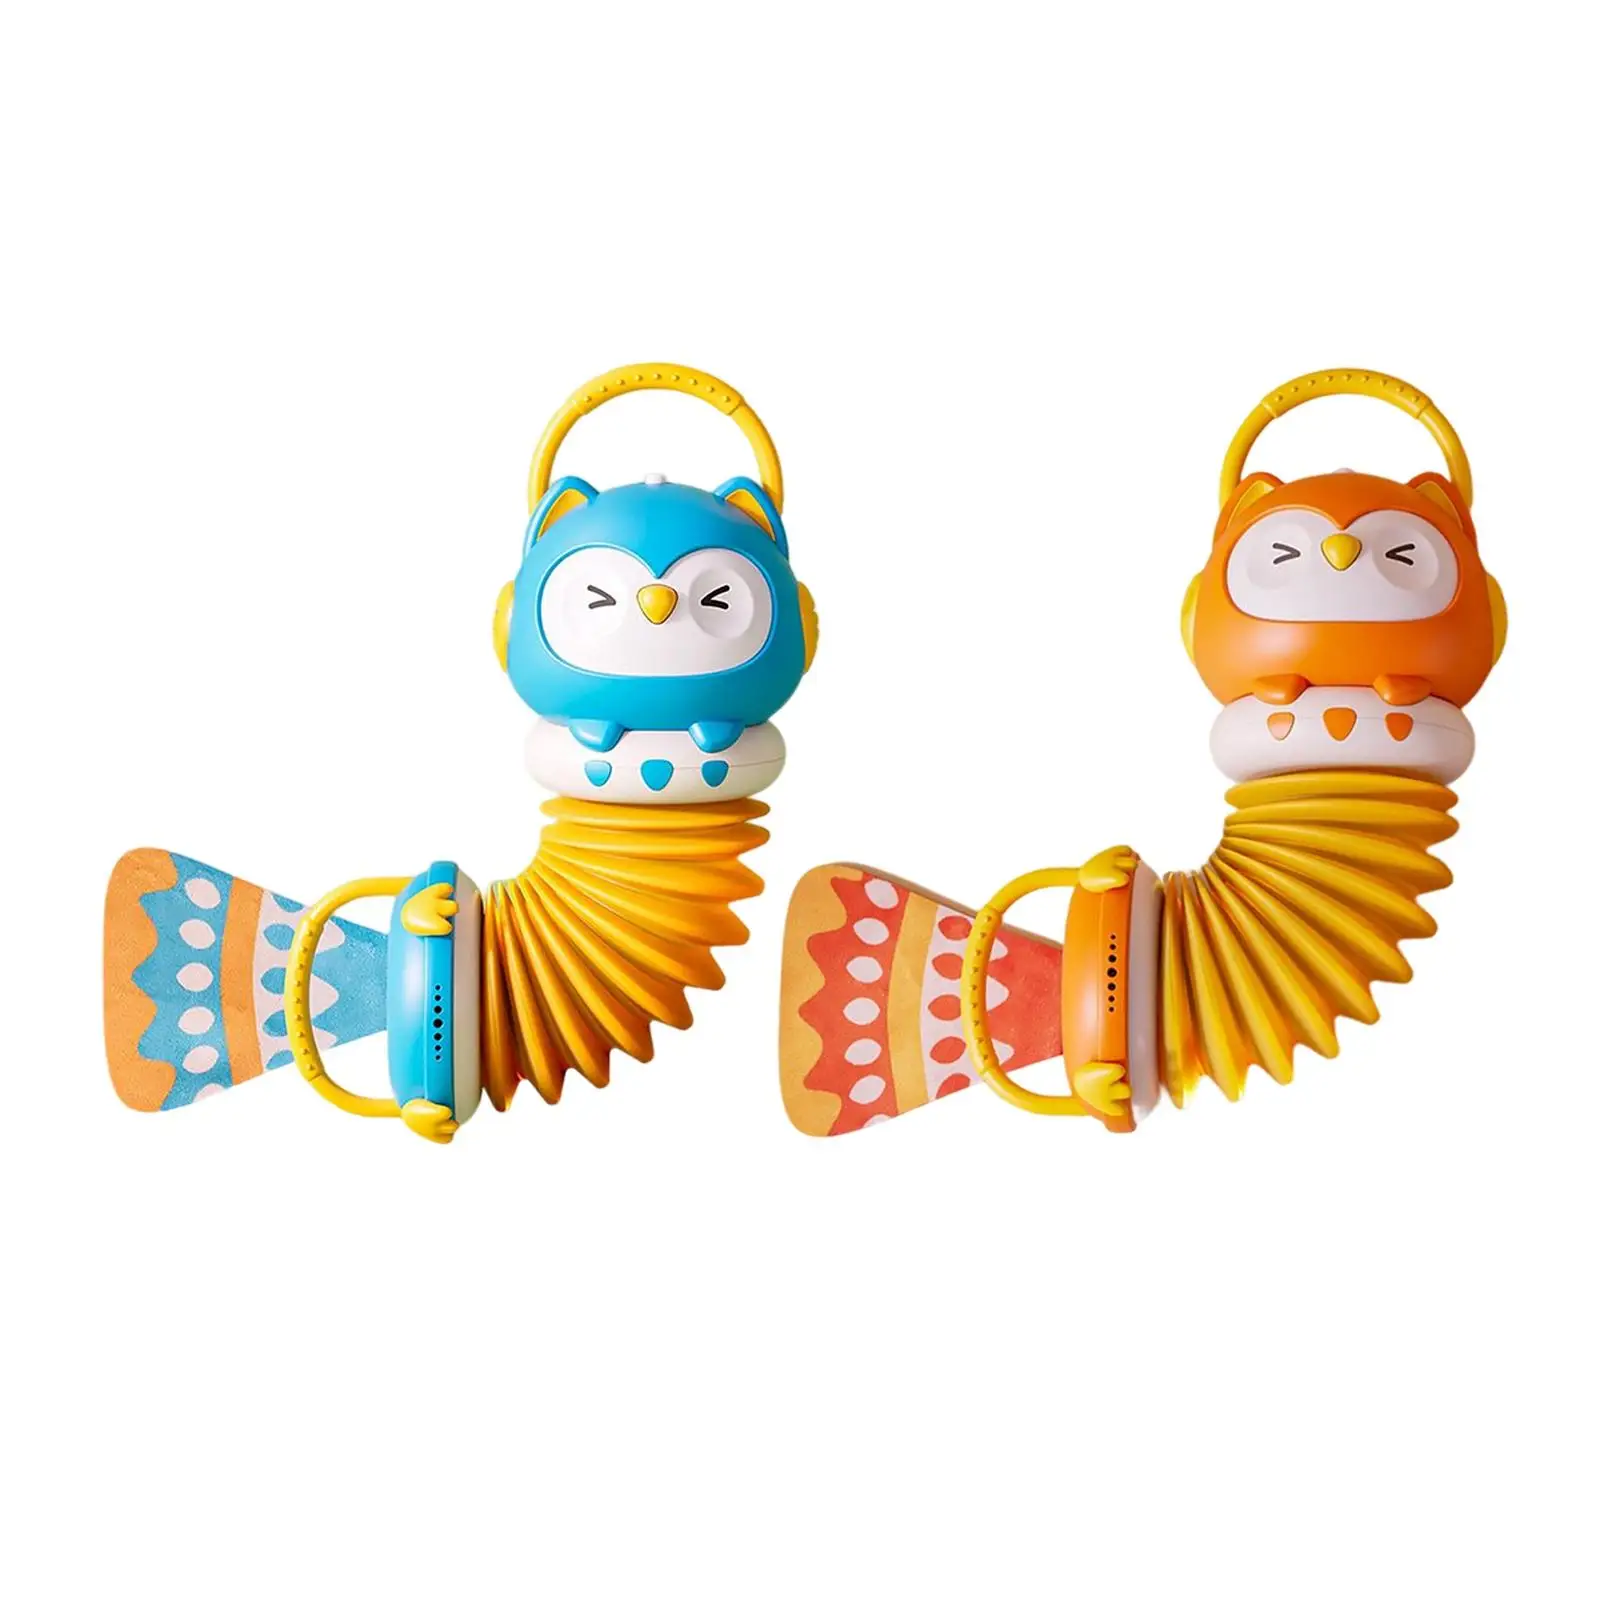 

Mini Baby Accordion Toy Early Educational Learning Rattles Toys for Boys Girls Kids Children Preschool Beginners Birthday Gifts